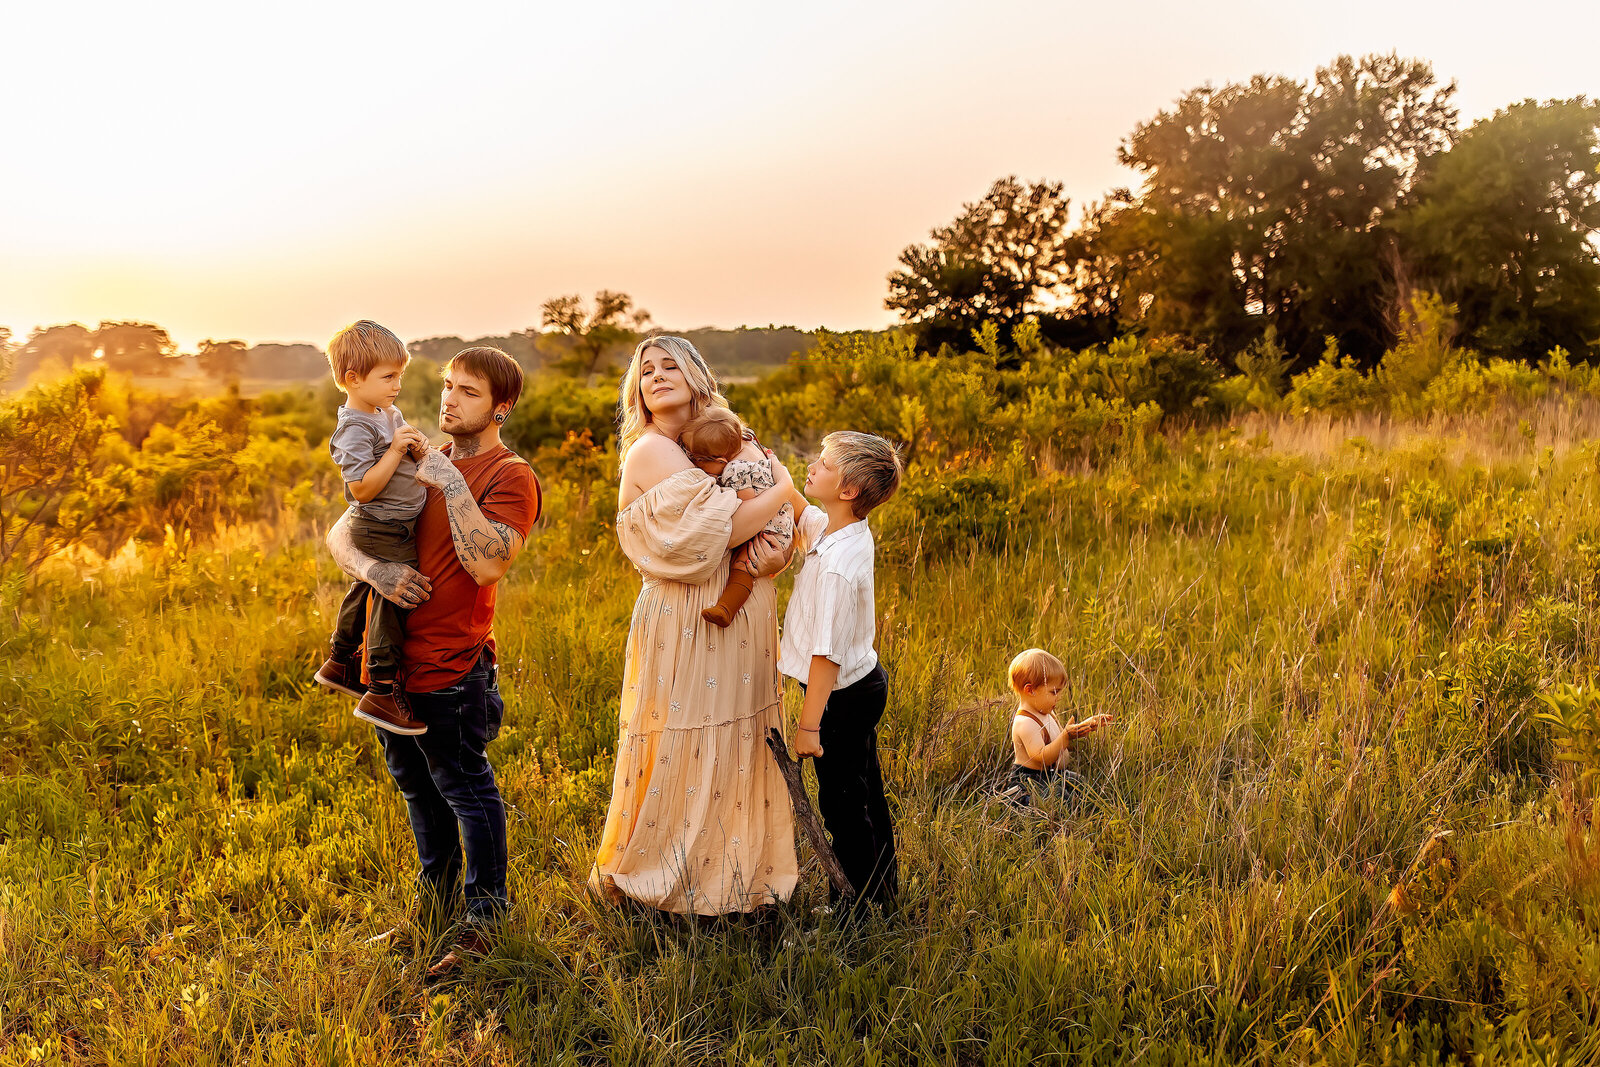 Family Session in Flower Mound, Texas | Burleson, Texas Family and Newborn Photographer